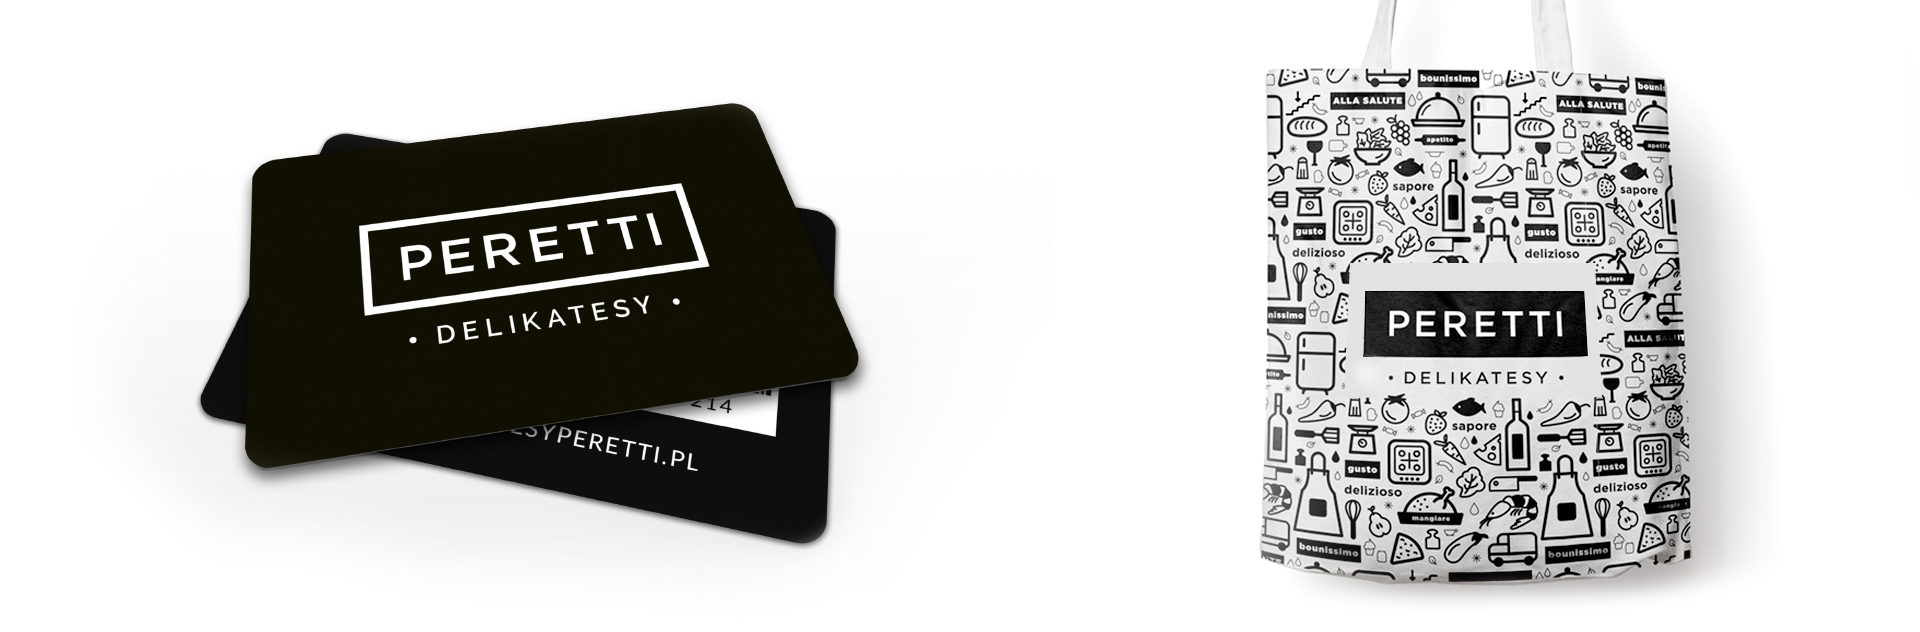 Design of loyality card and material bag for Peretti